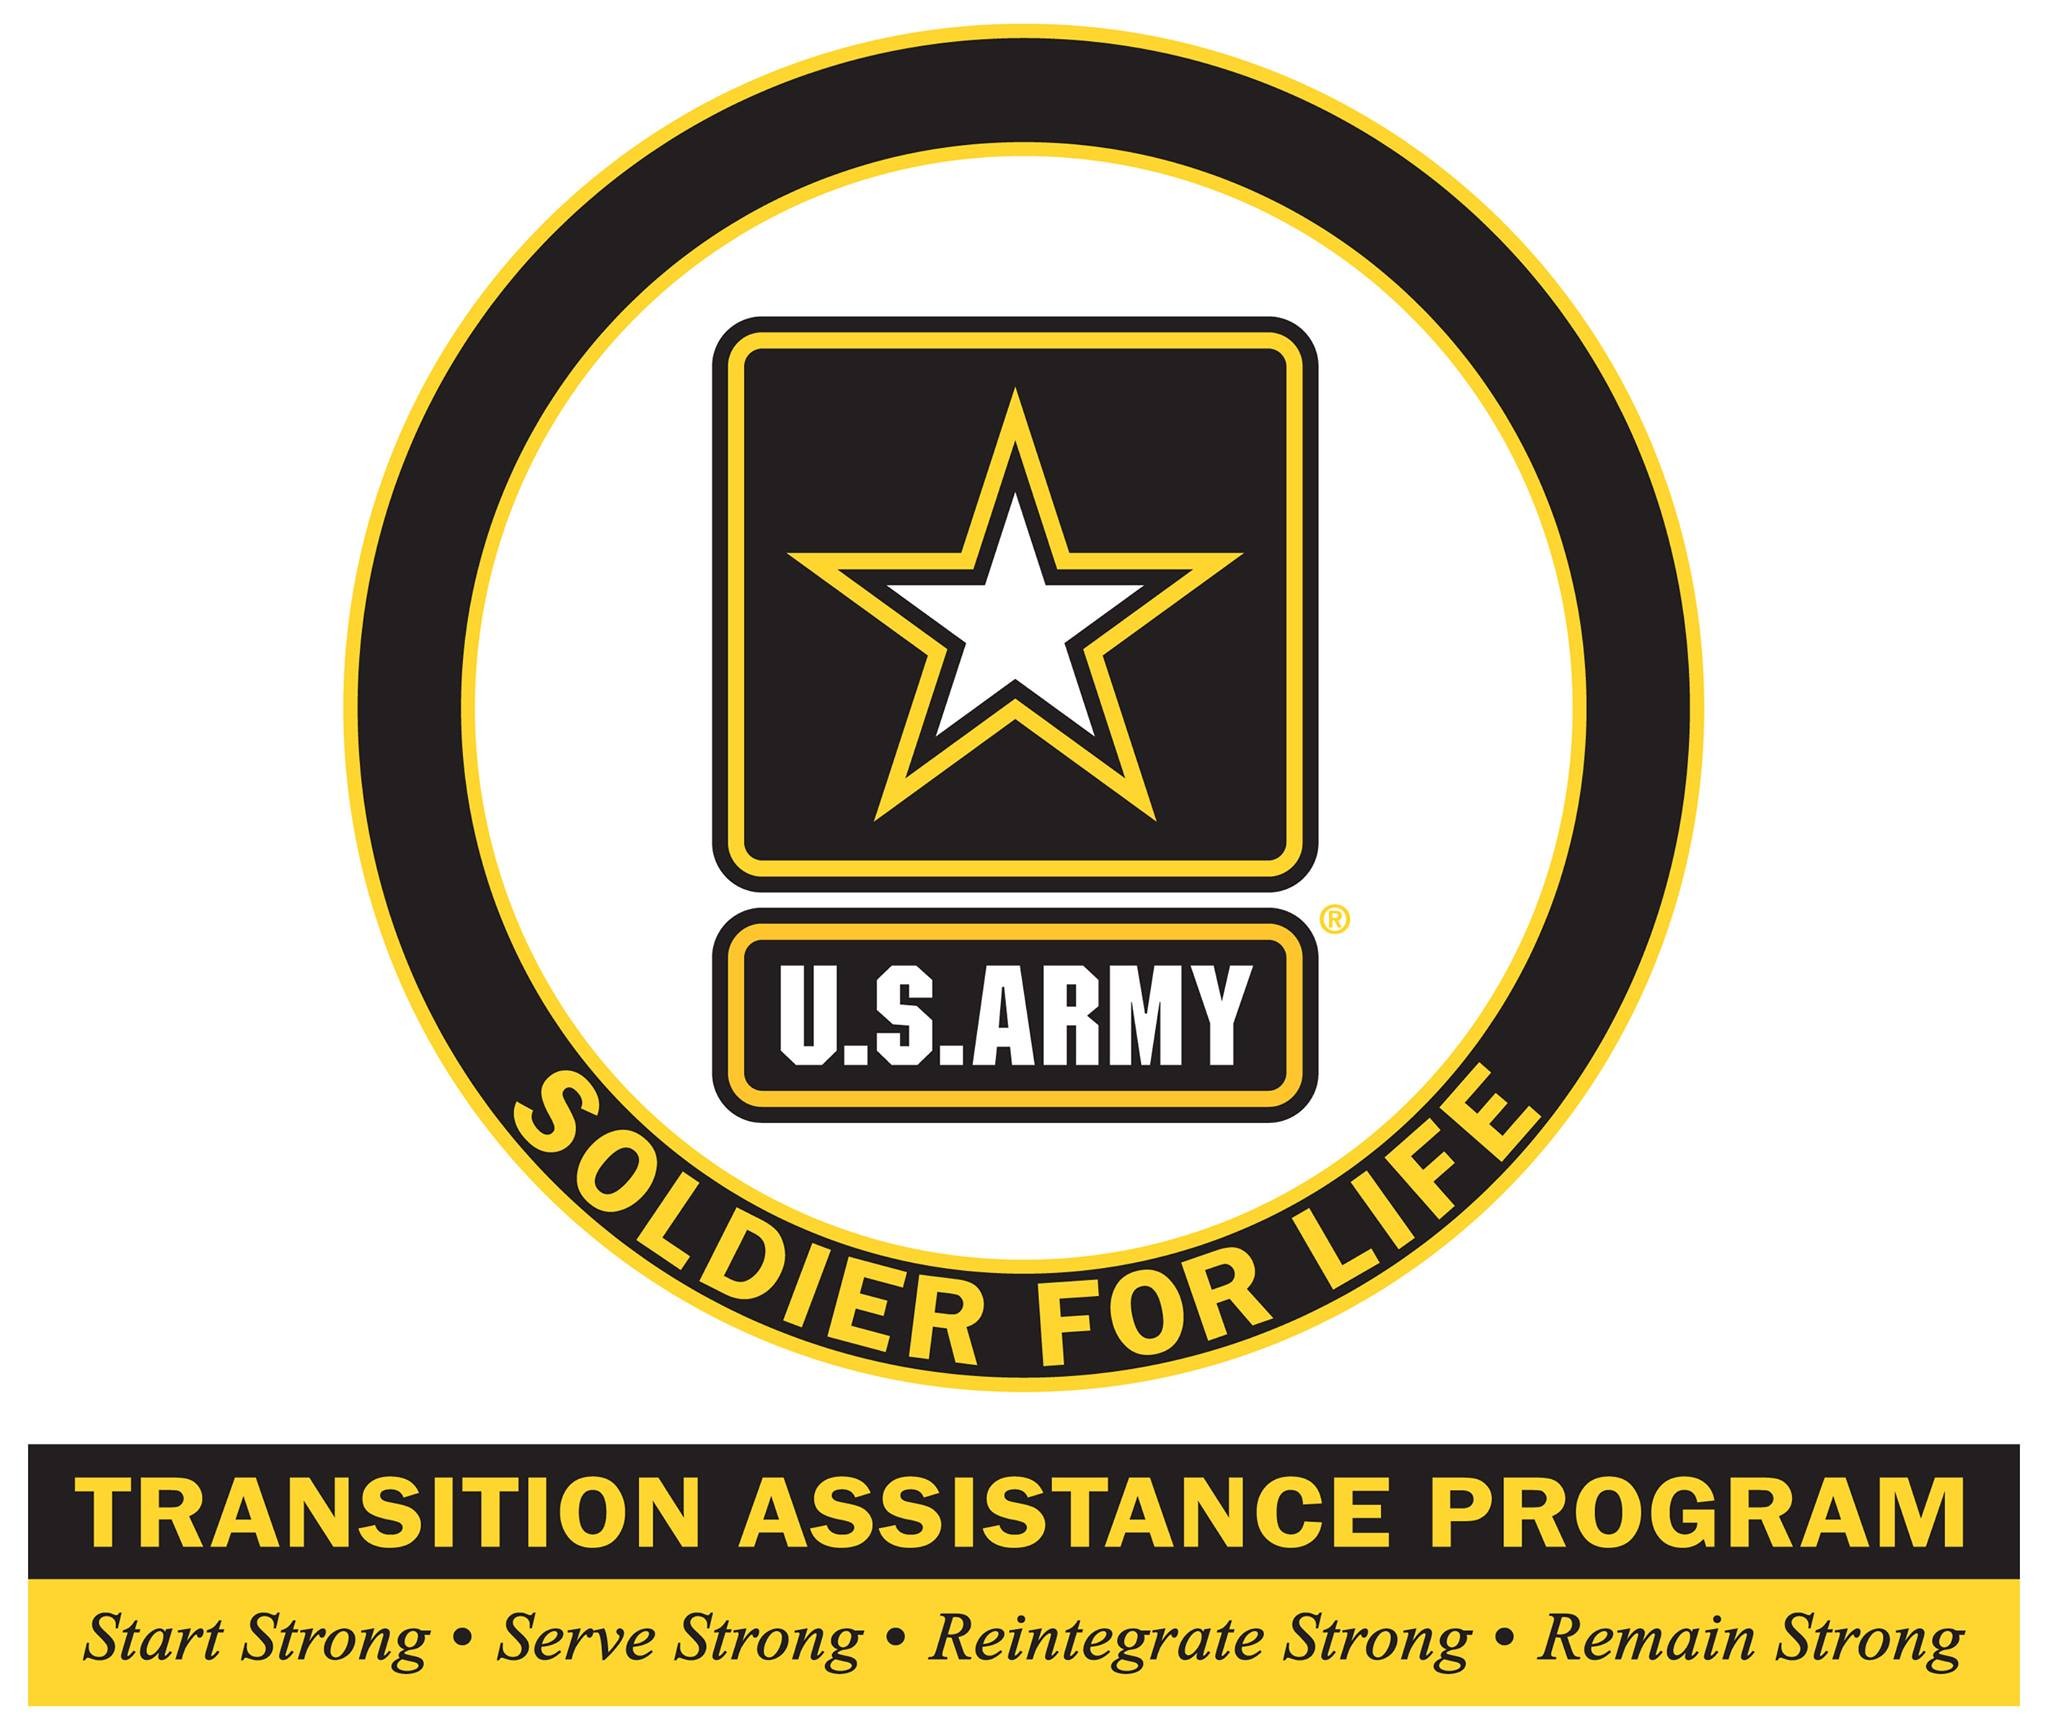 ACAP receives a new name, logo, philosophy Soldier for LifeTransition